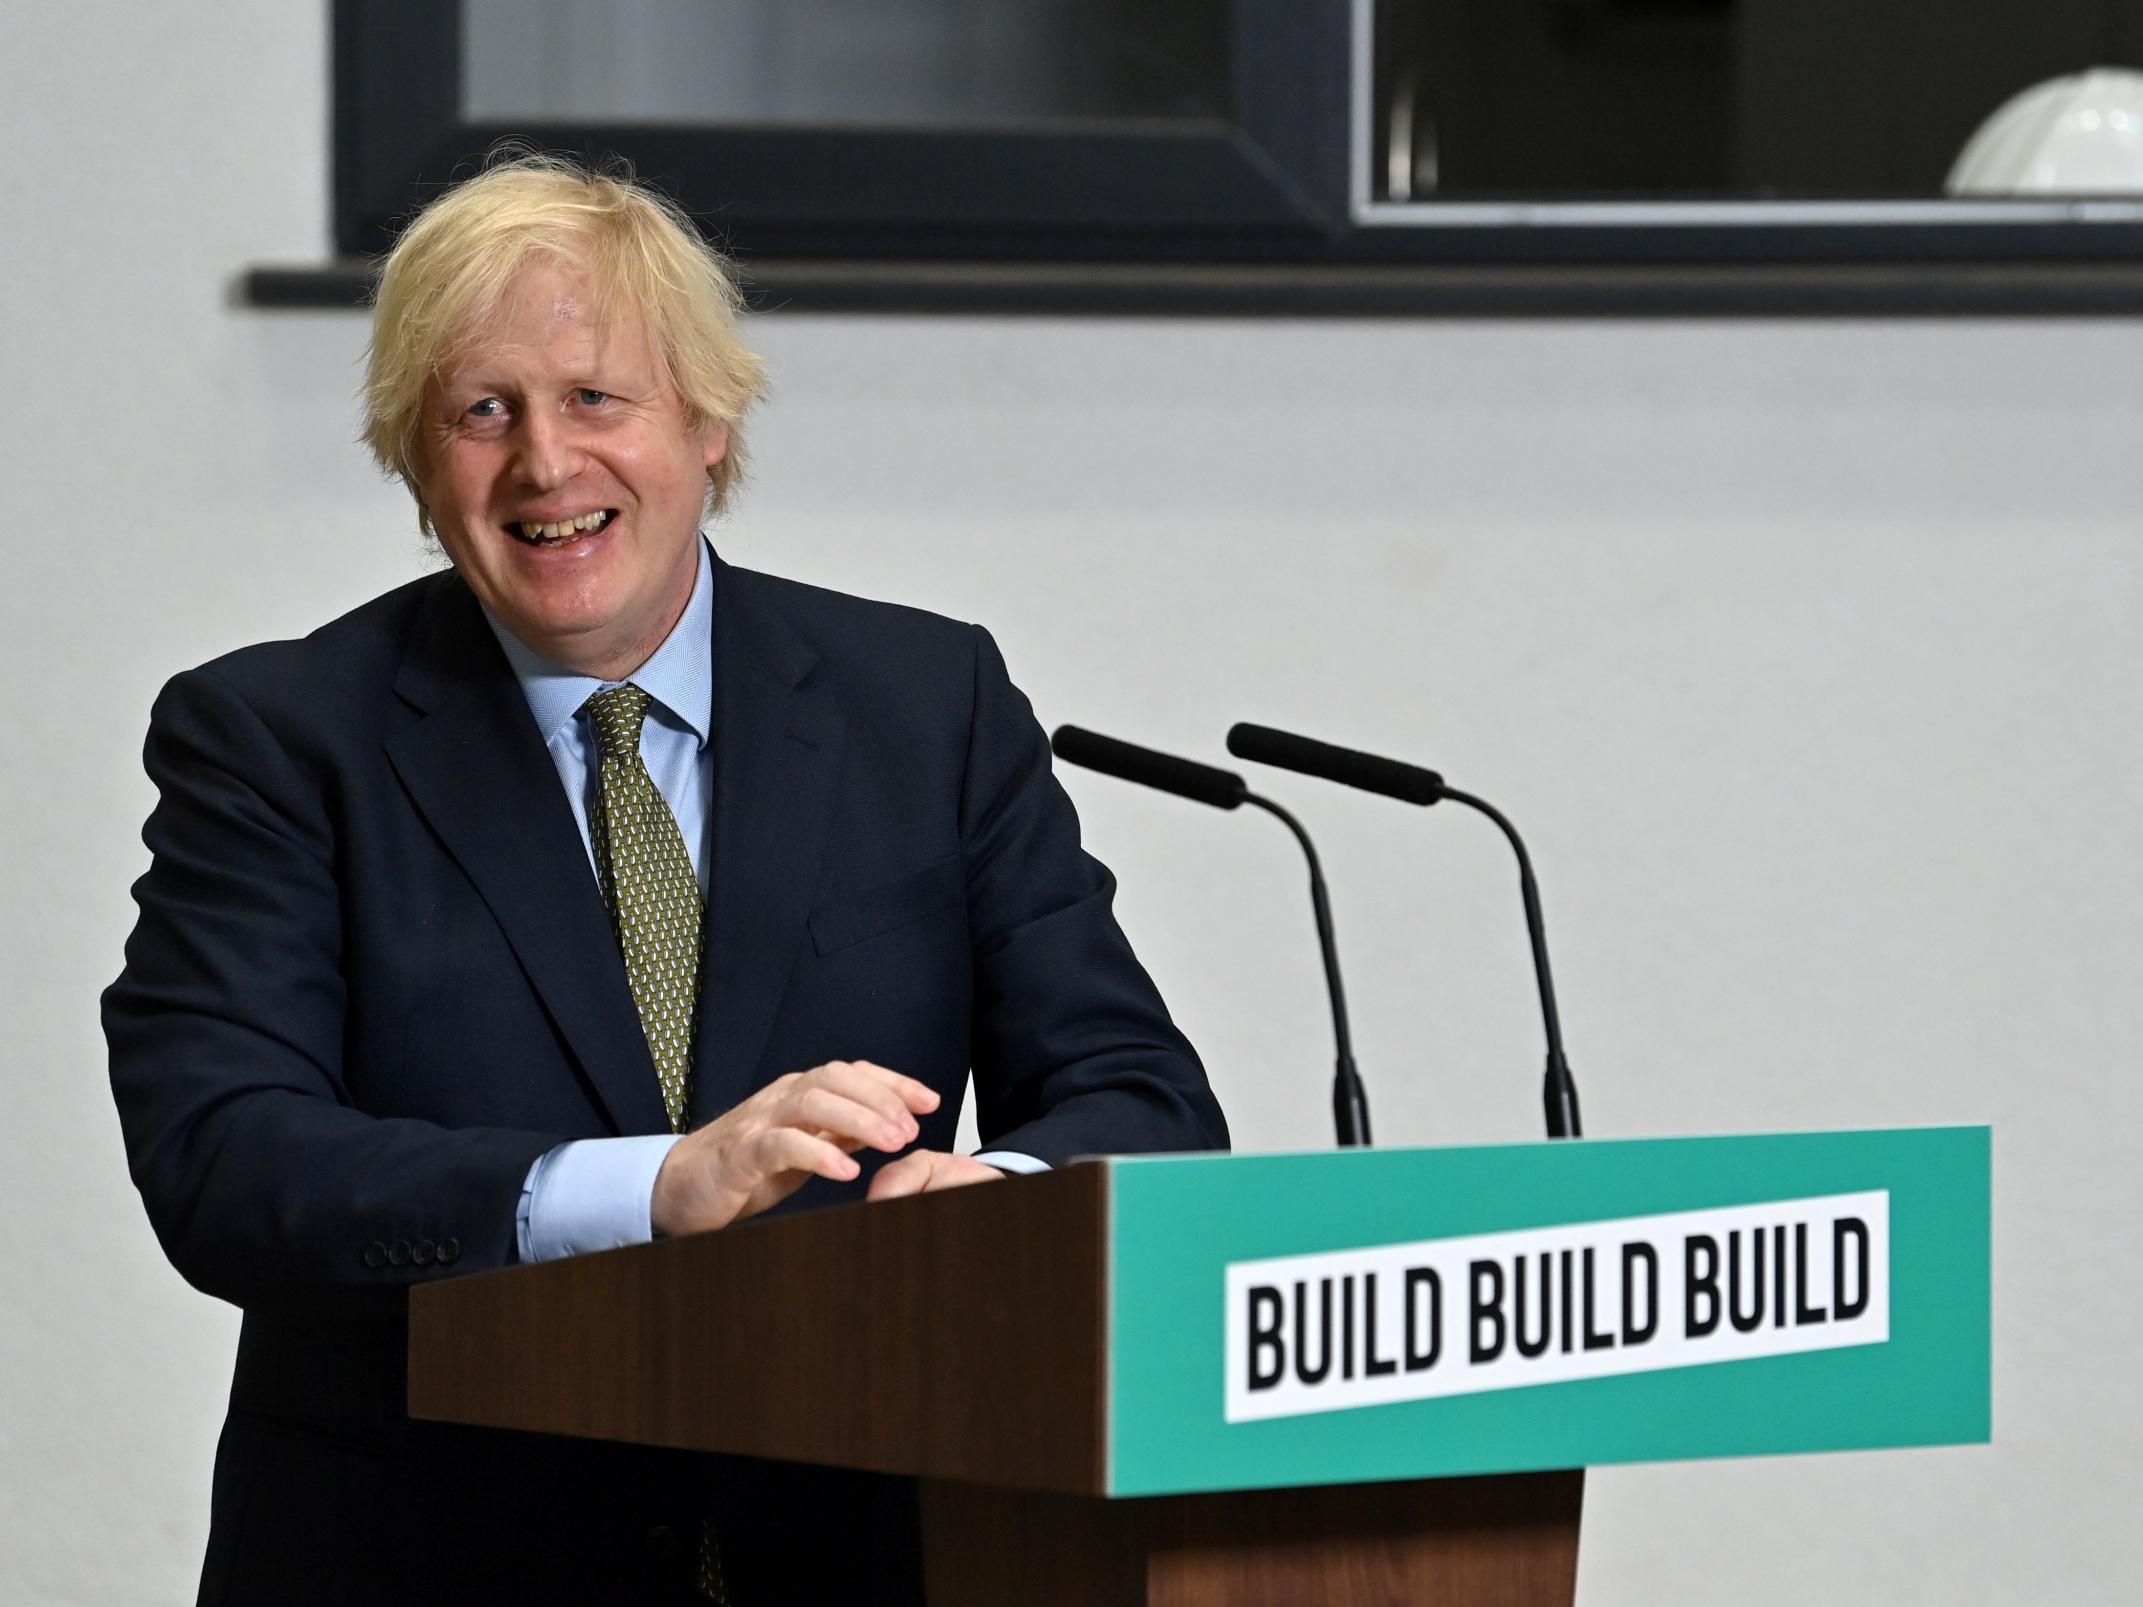 Boris Johnson's plan to rebuild the economy might actually be even more inadequate than he is